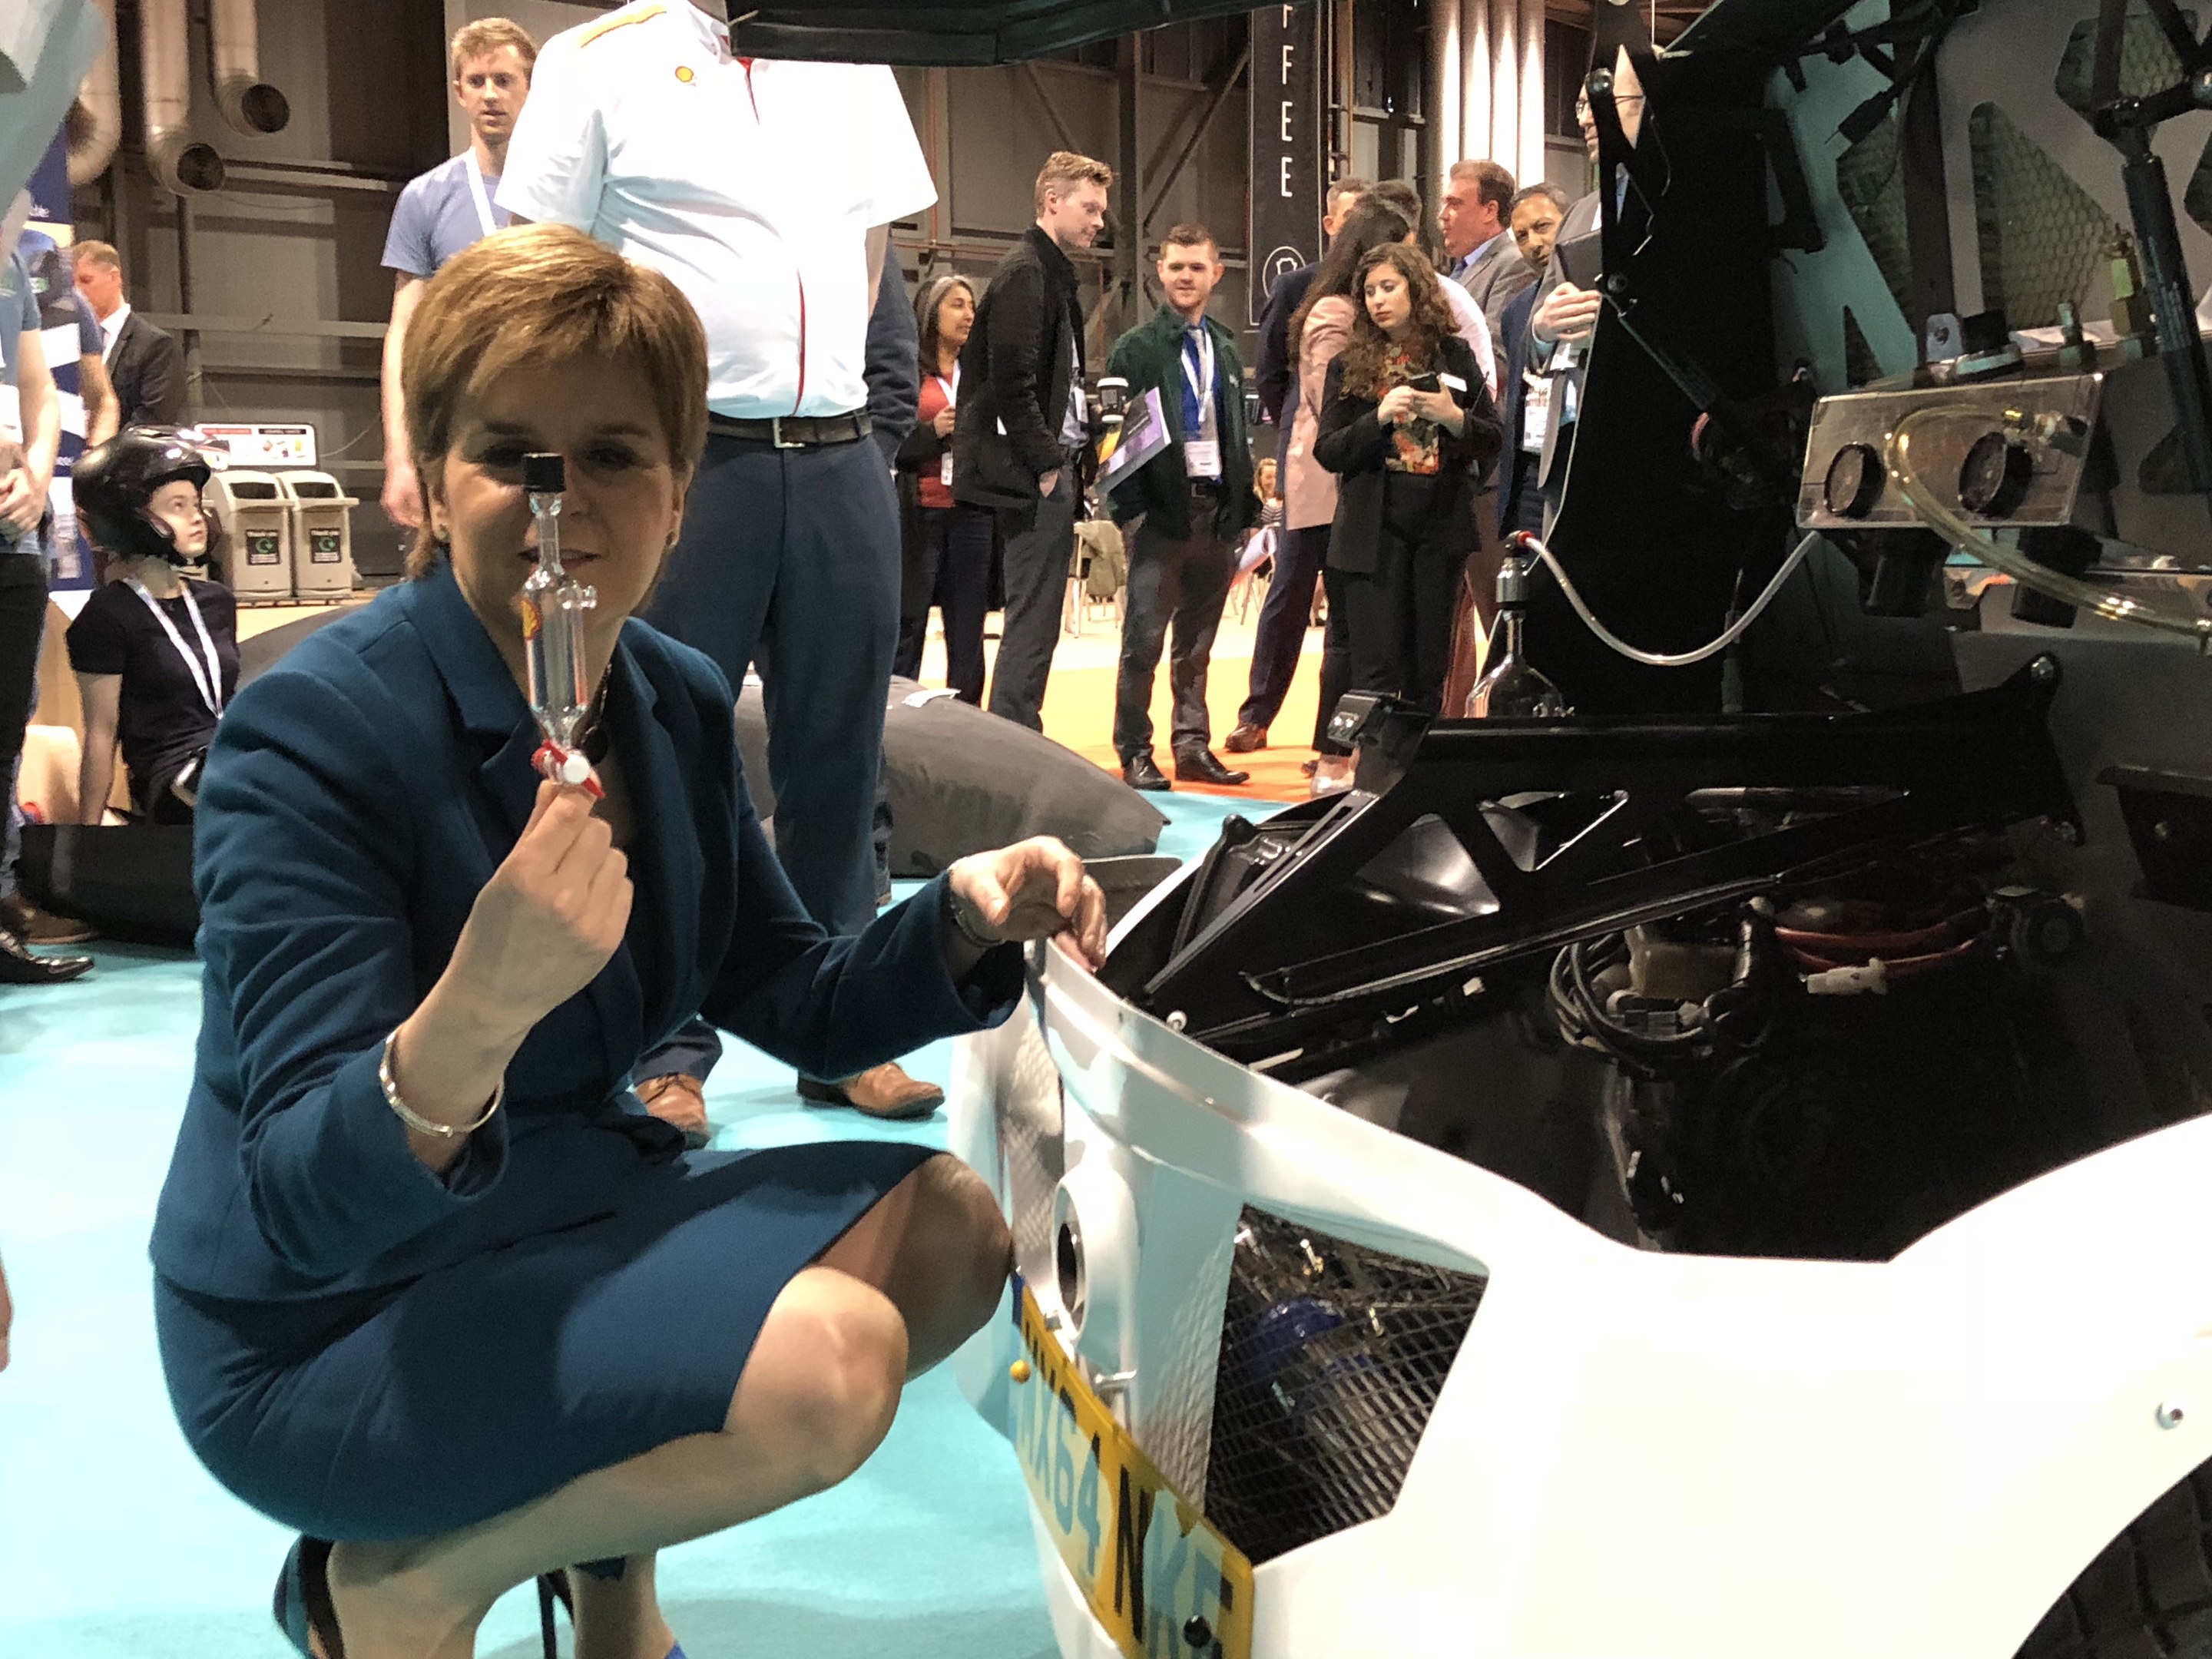 First Minister Nicola Sturgeon inspects Shell's electric vehicle.